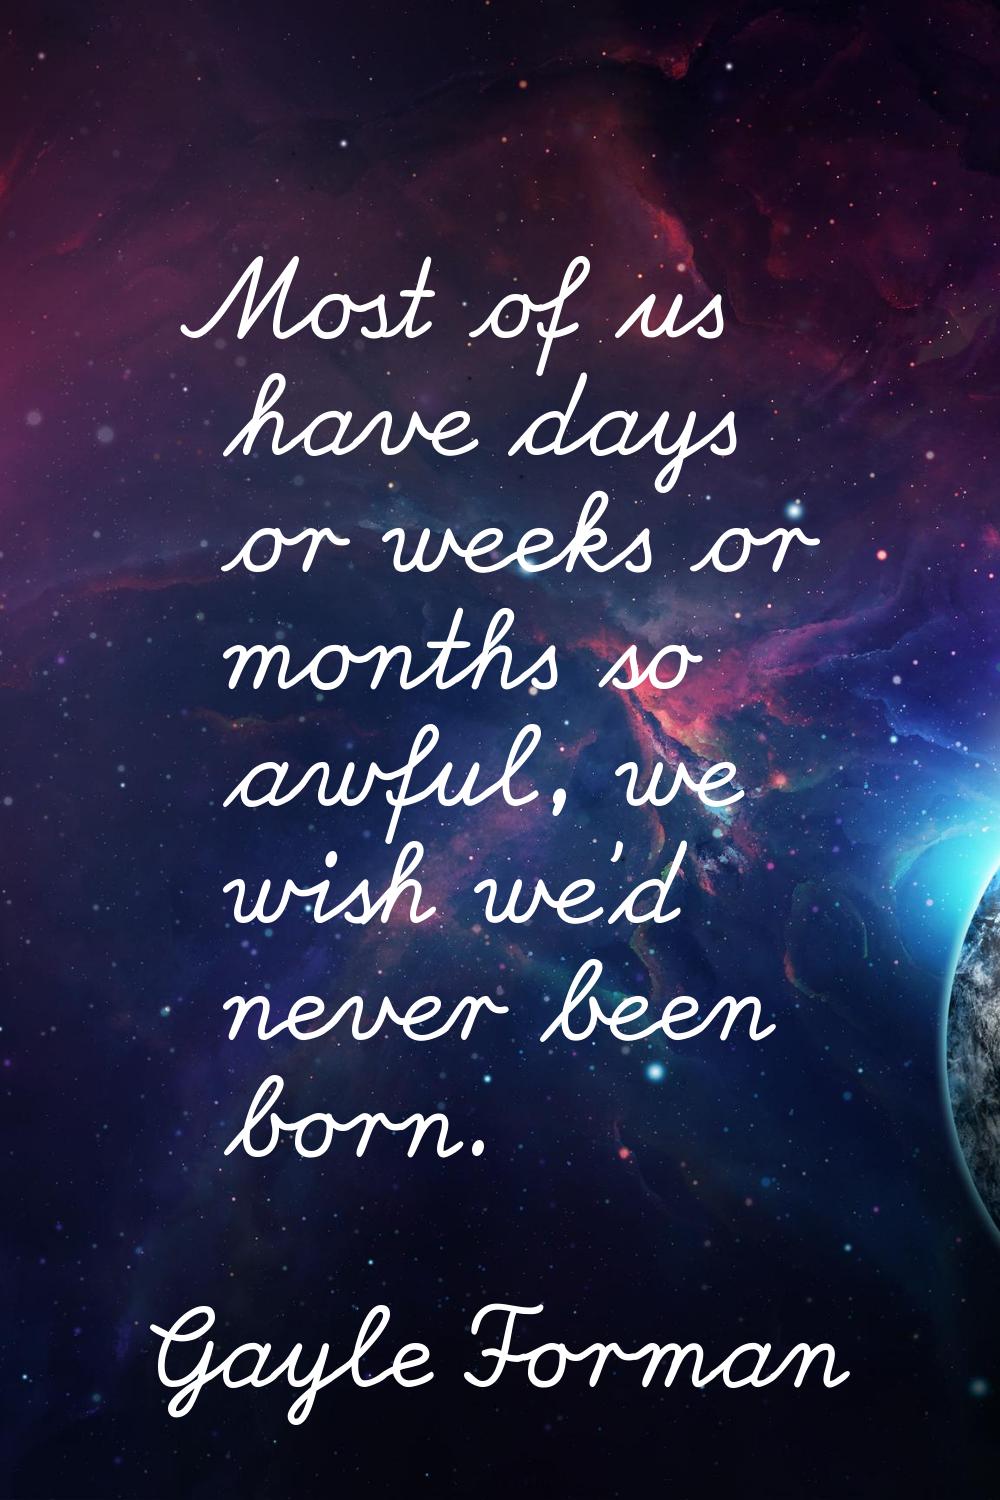 Most of us have days or weeks or months so awful, we wish we'd never been born.